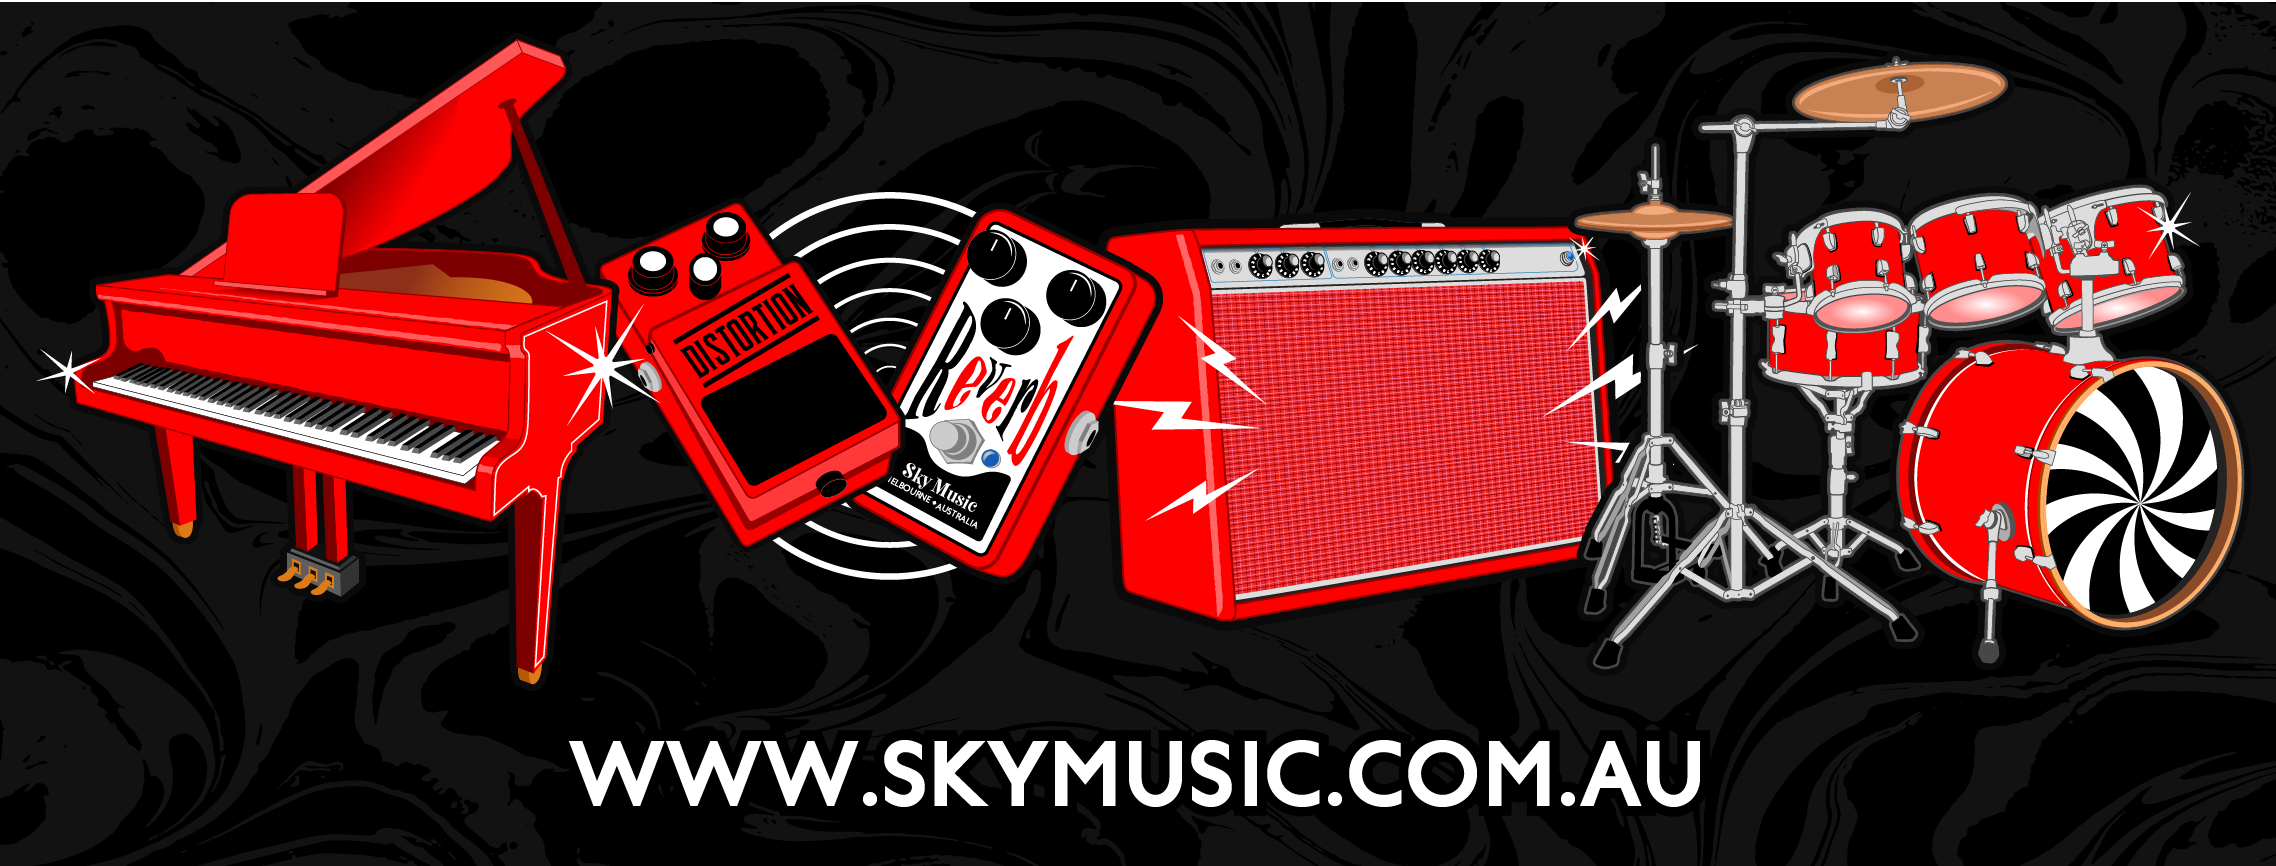 All Sky Music Deals & Promotions